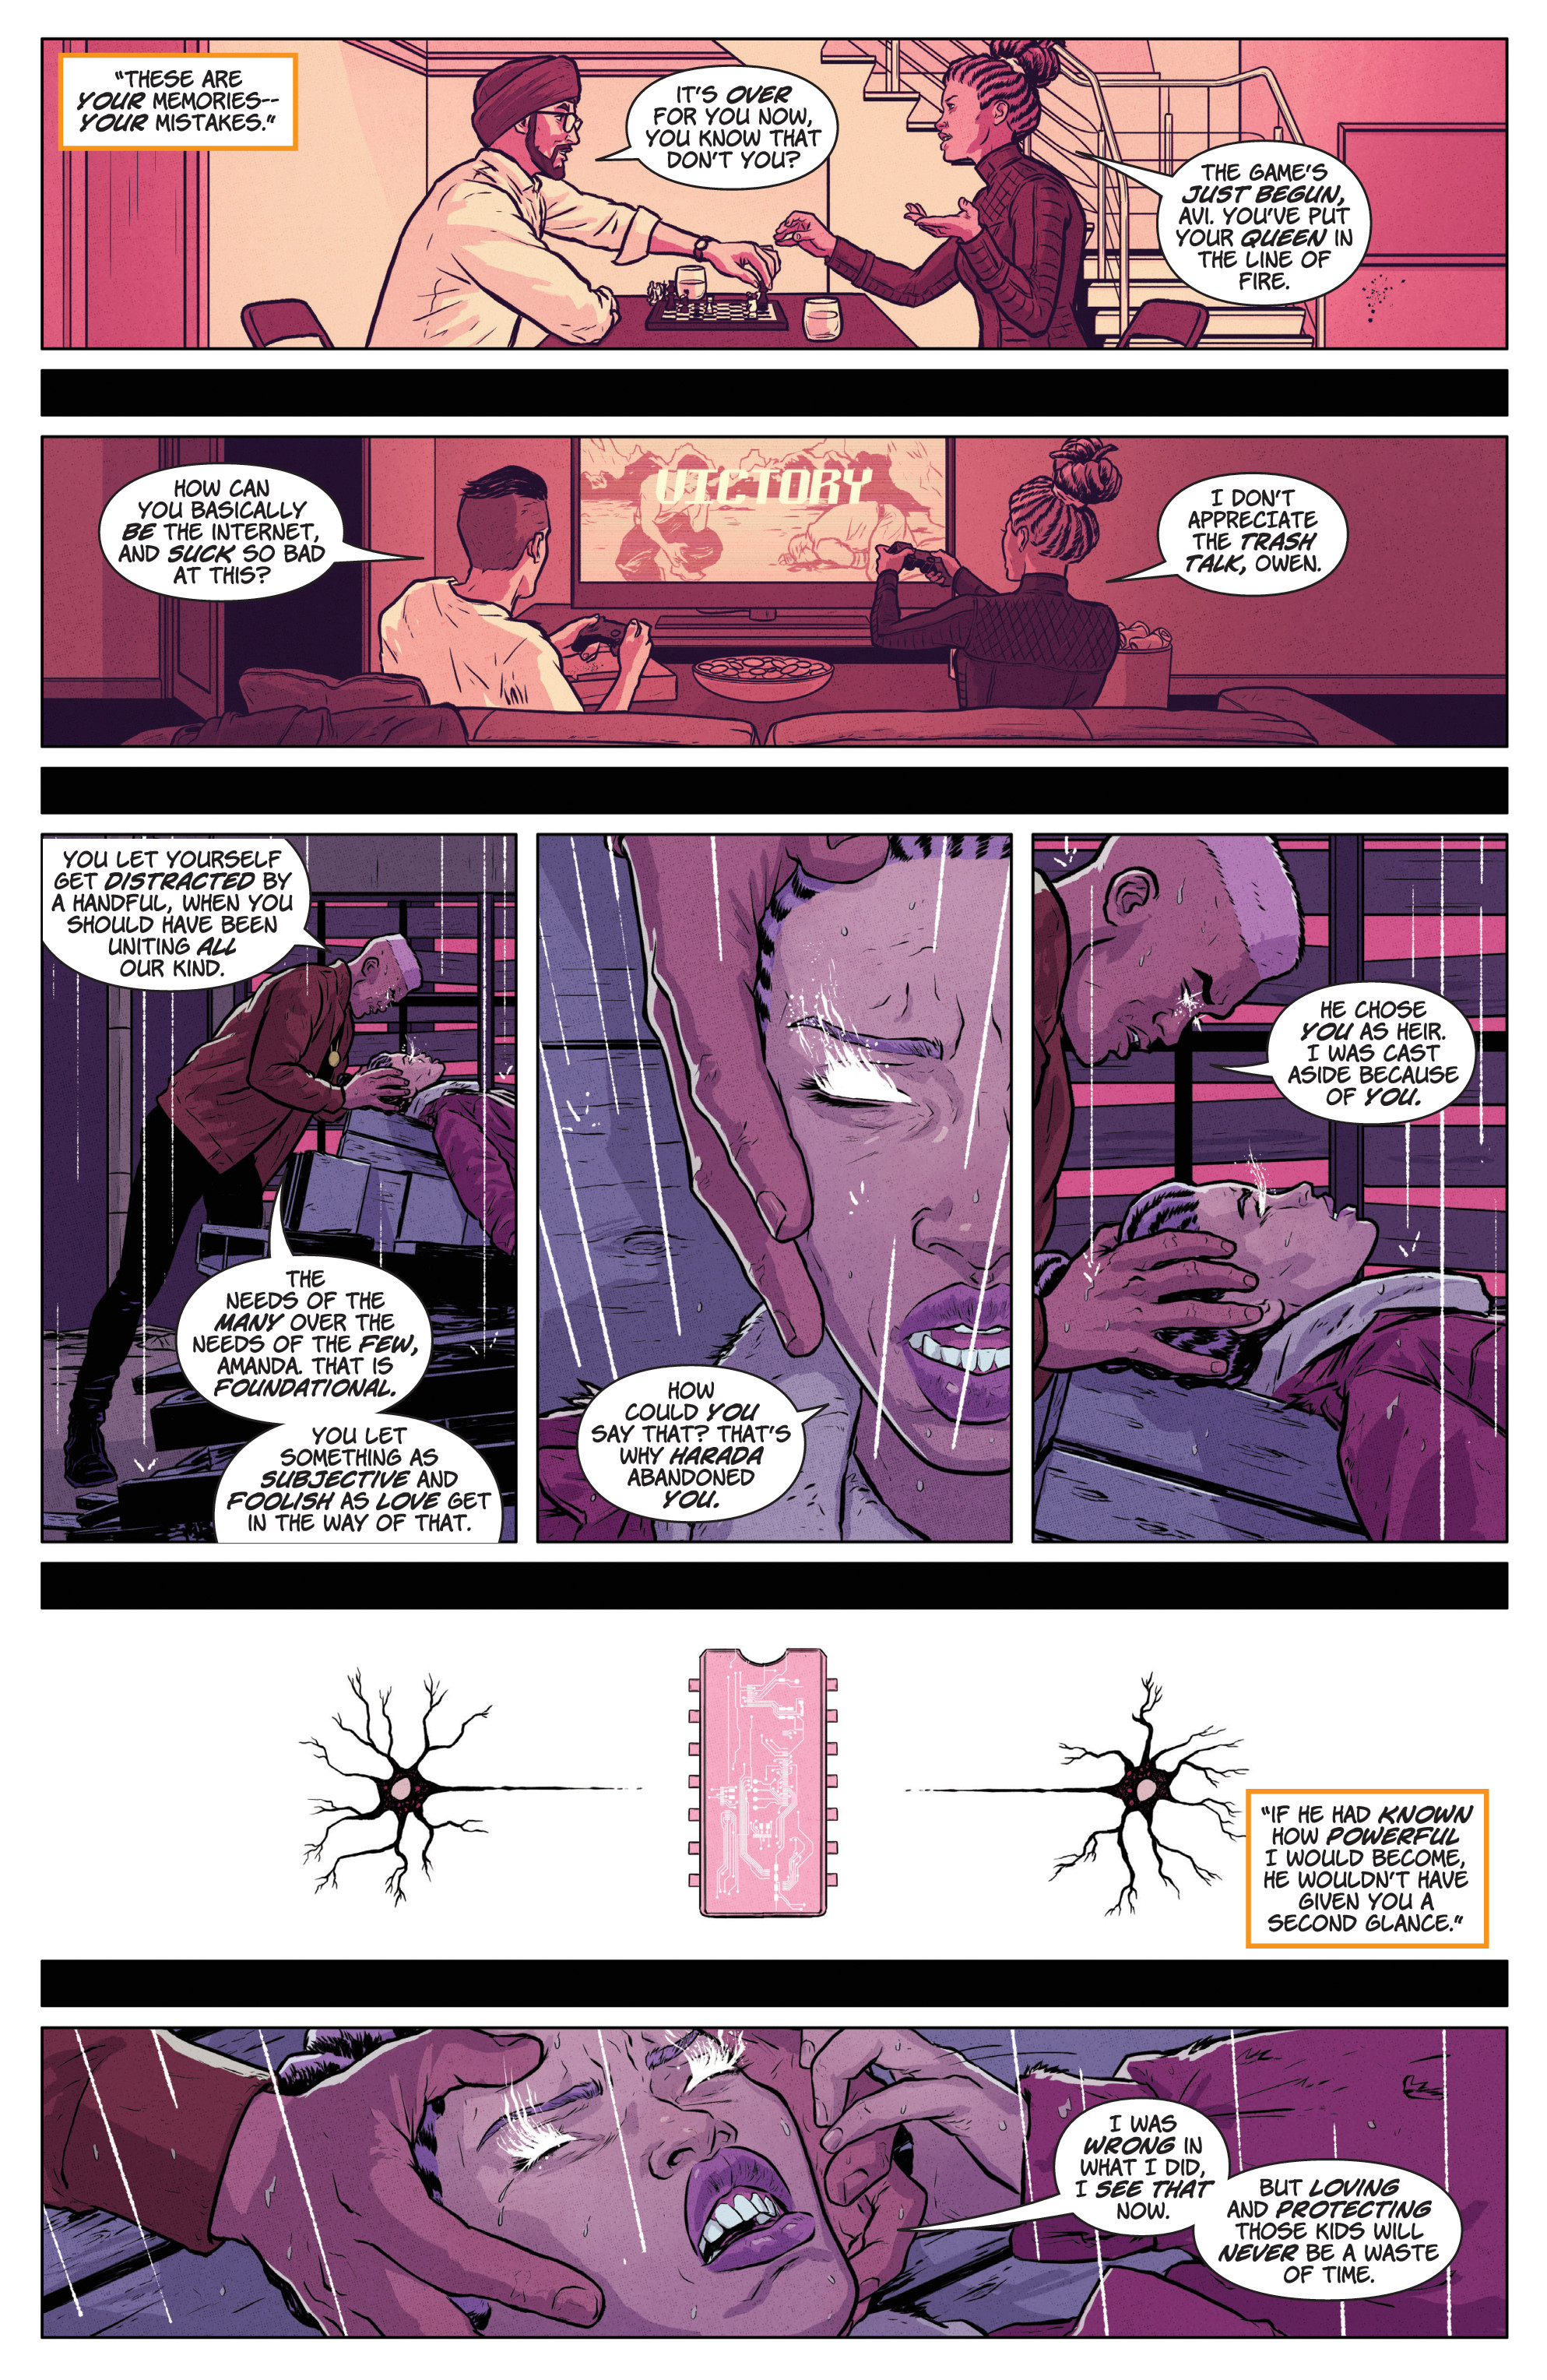 Livewire (2018-): Chapter 4 - Page 5